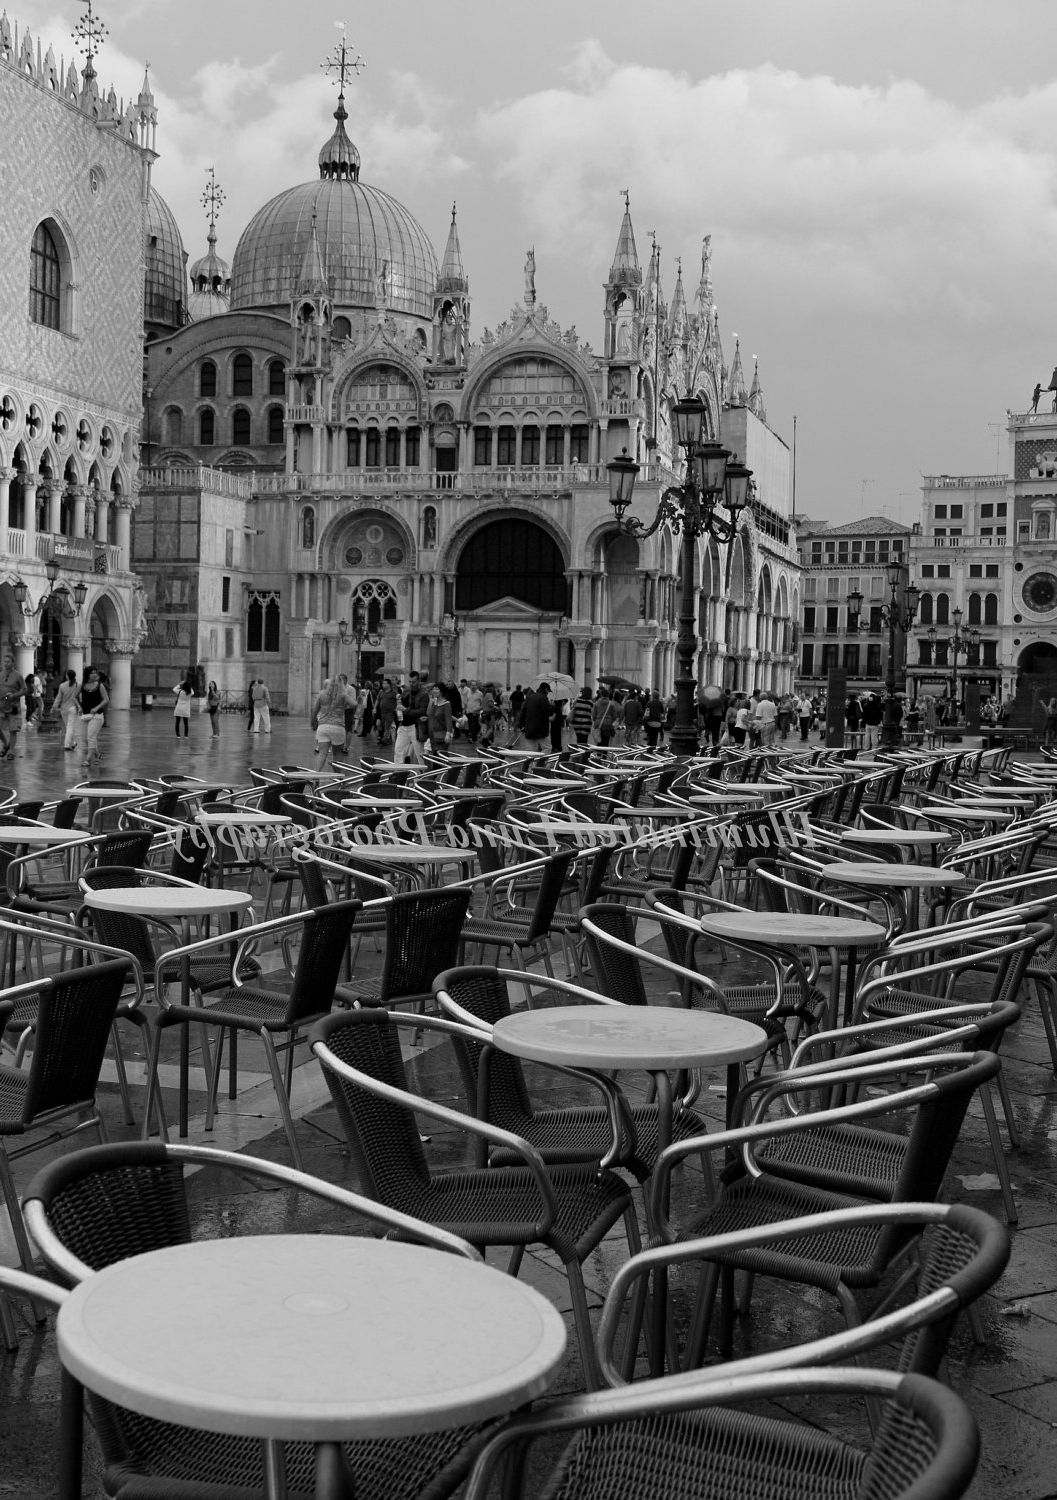 Most Recent Italian Cafe Wall Art With Regard To Cafe In St Mark's Square, Venice – 5 X 7 Fine Art Black And White (View 9 of 15)